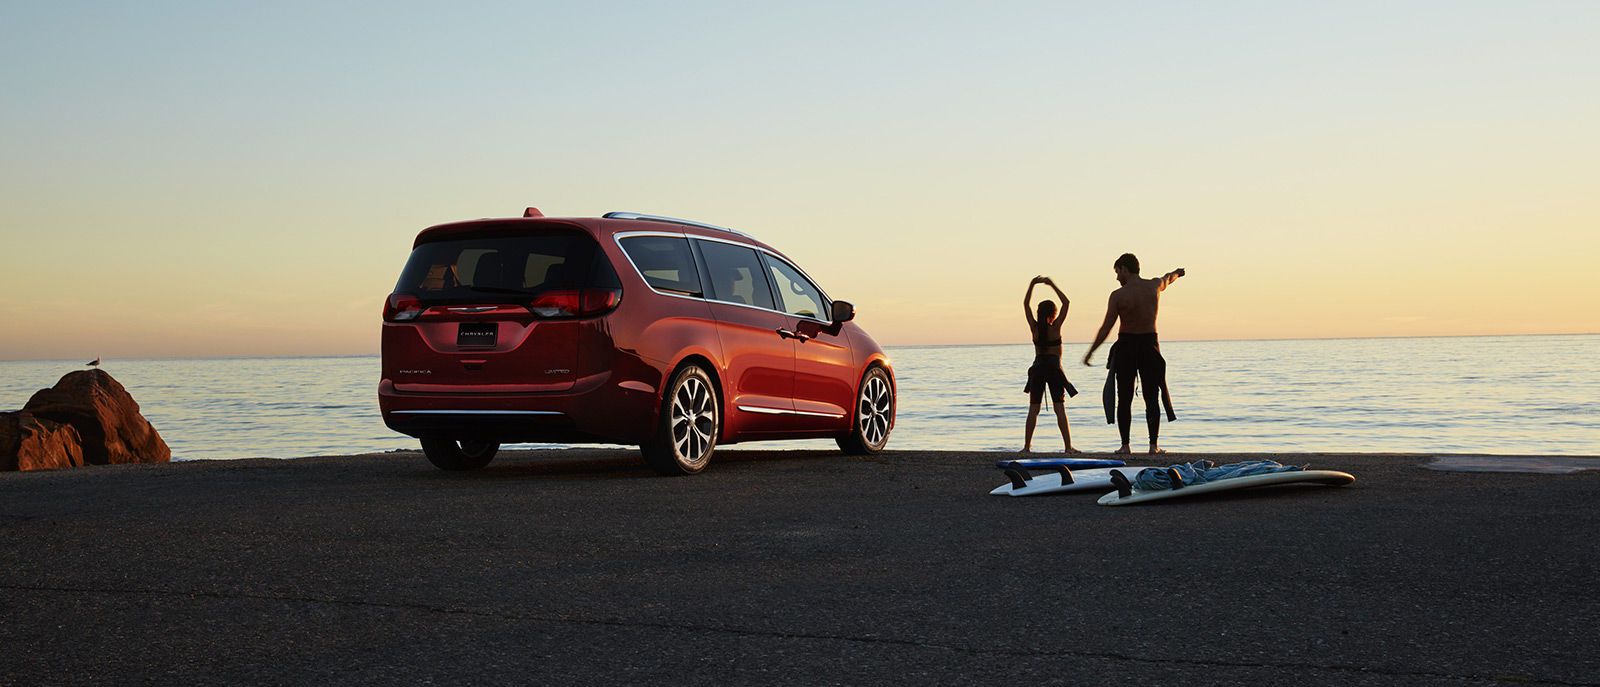 Red Pacifica Rear Exterior Surfing